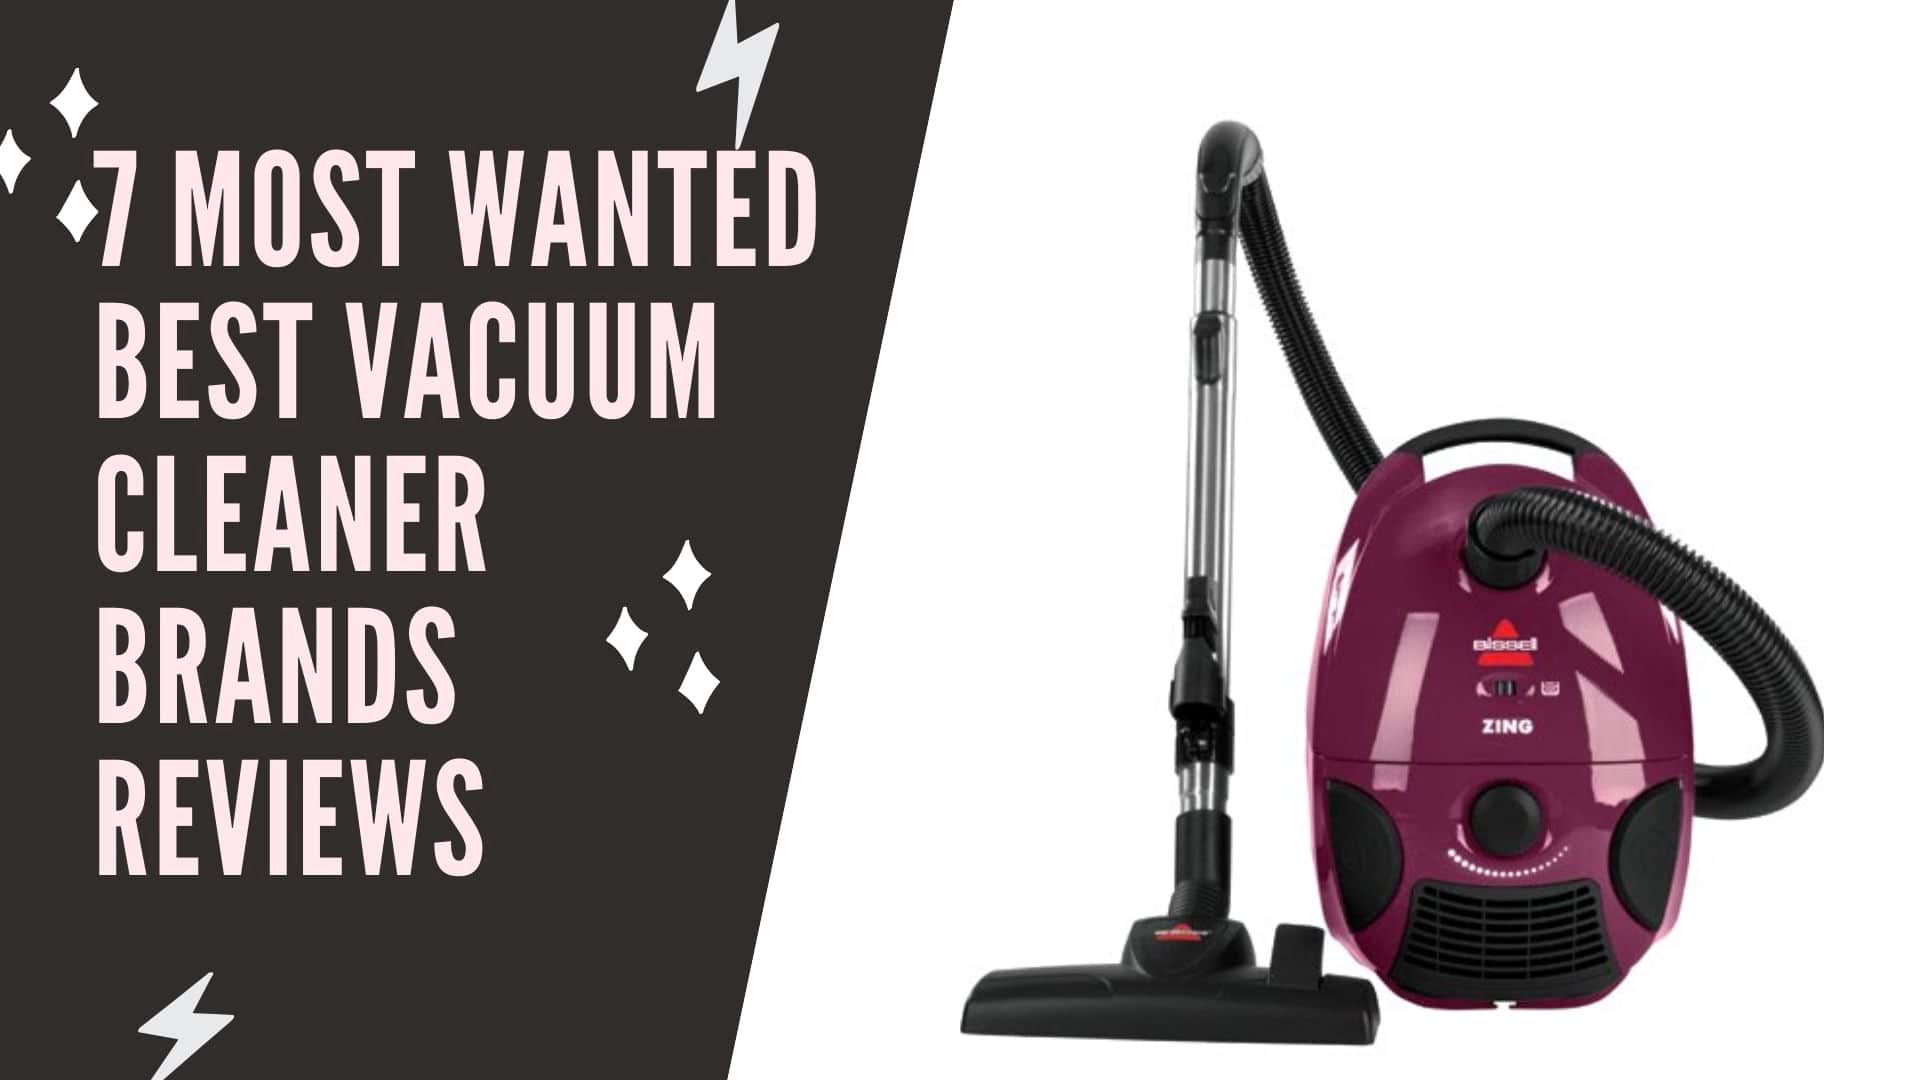 which brand of vacuum cleaner is the best